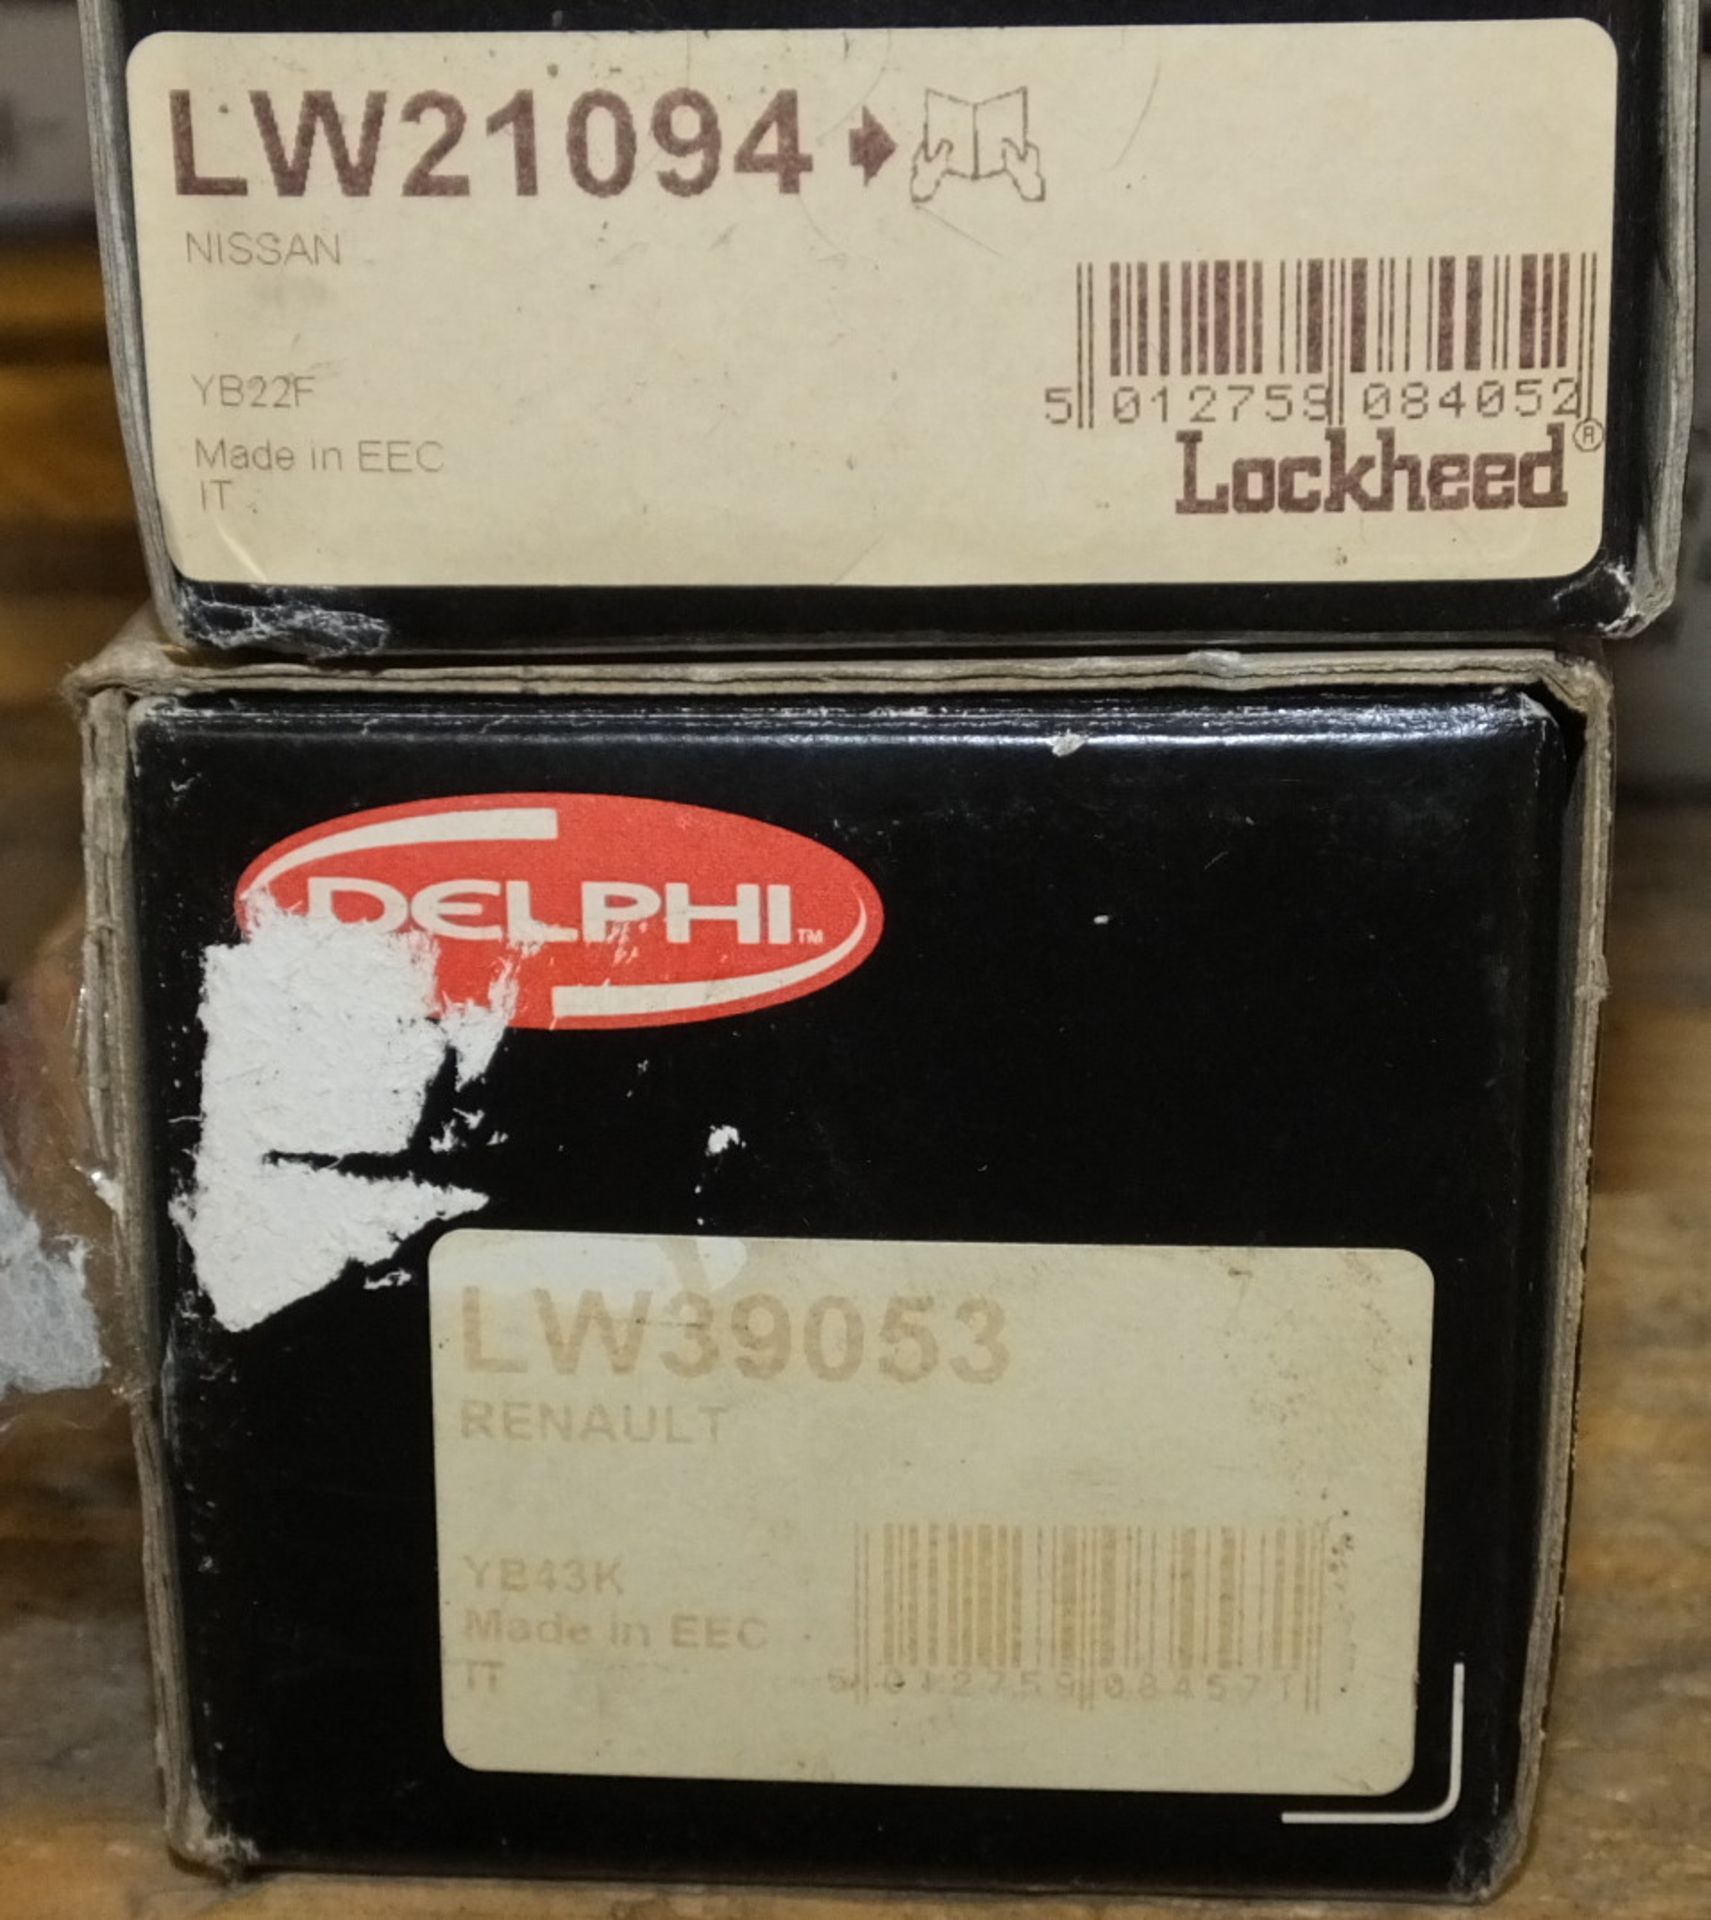 2x Delphi Lockheed hydraulic parts - check pictures for models - Image 2 of 2